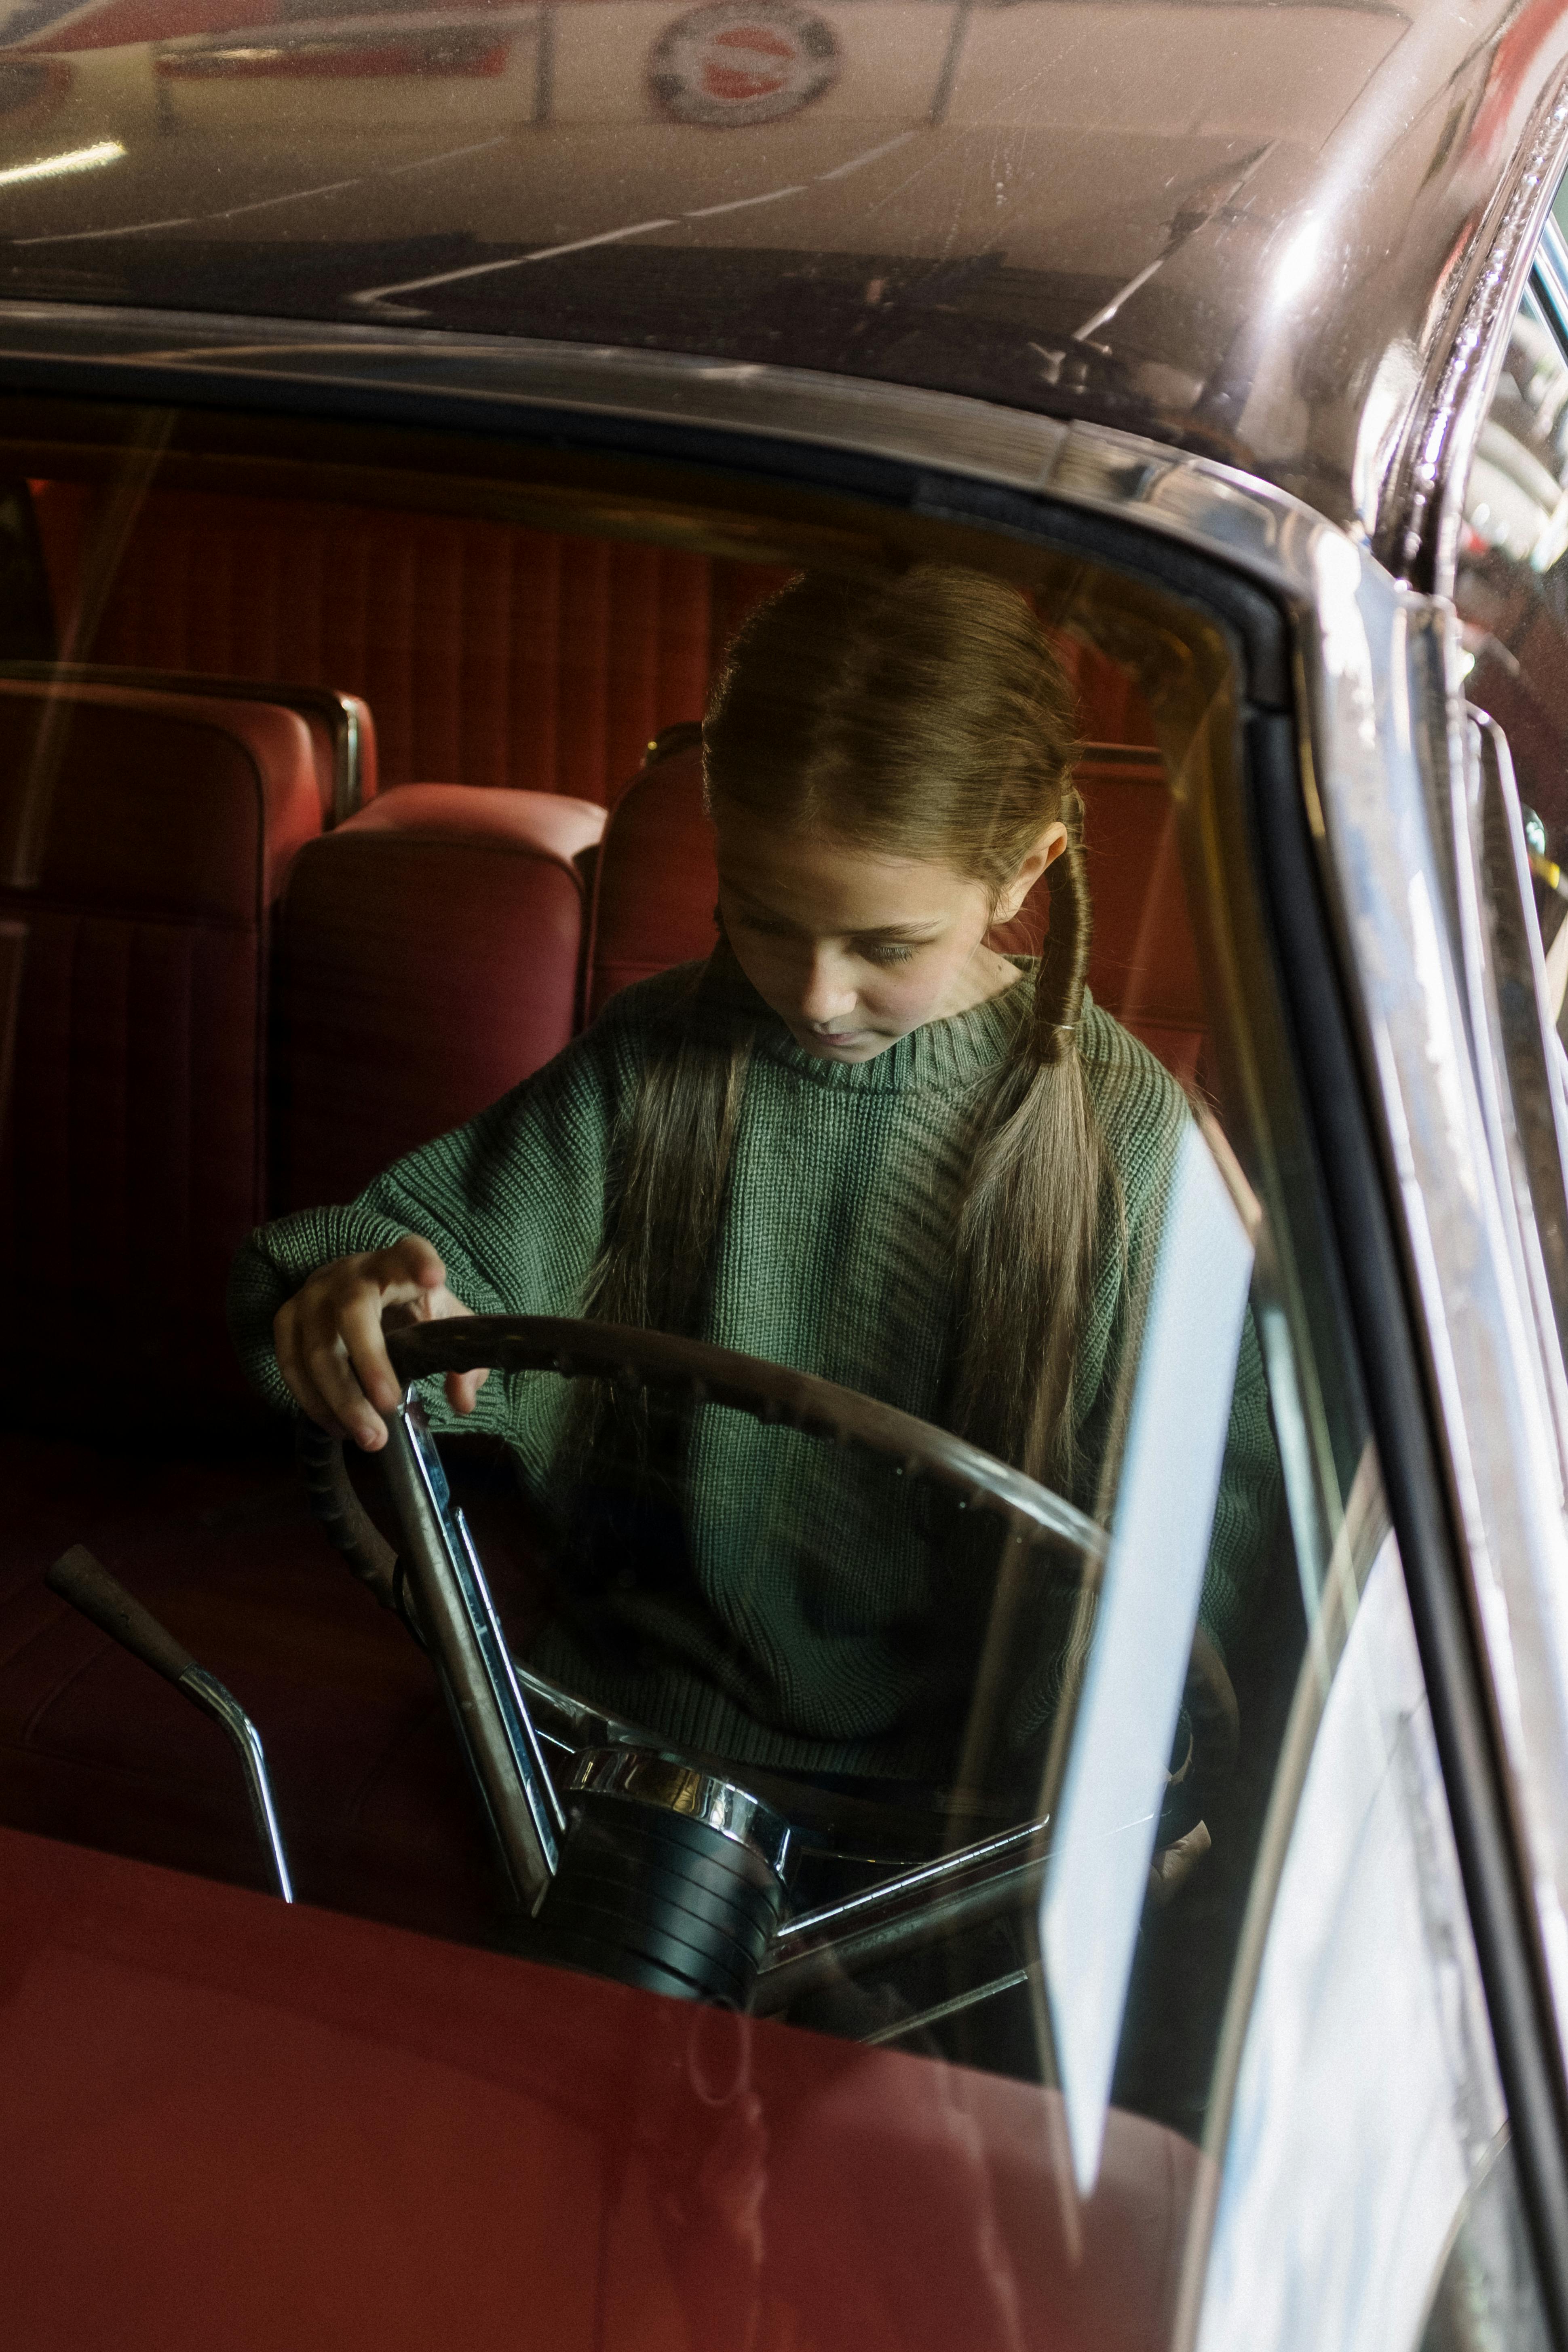 A little girl playing in a parked car | Source: Pexels